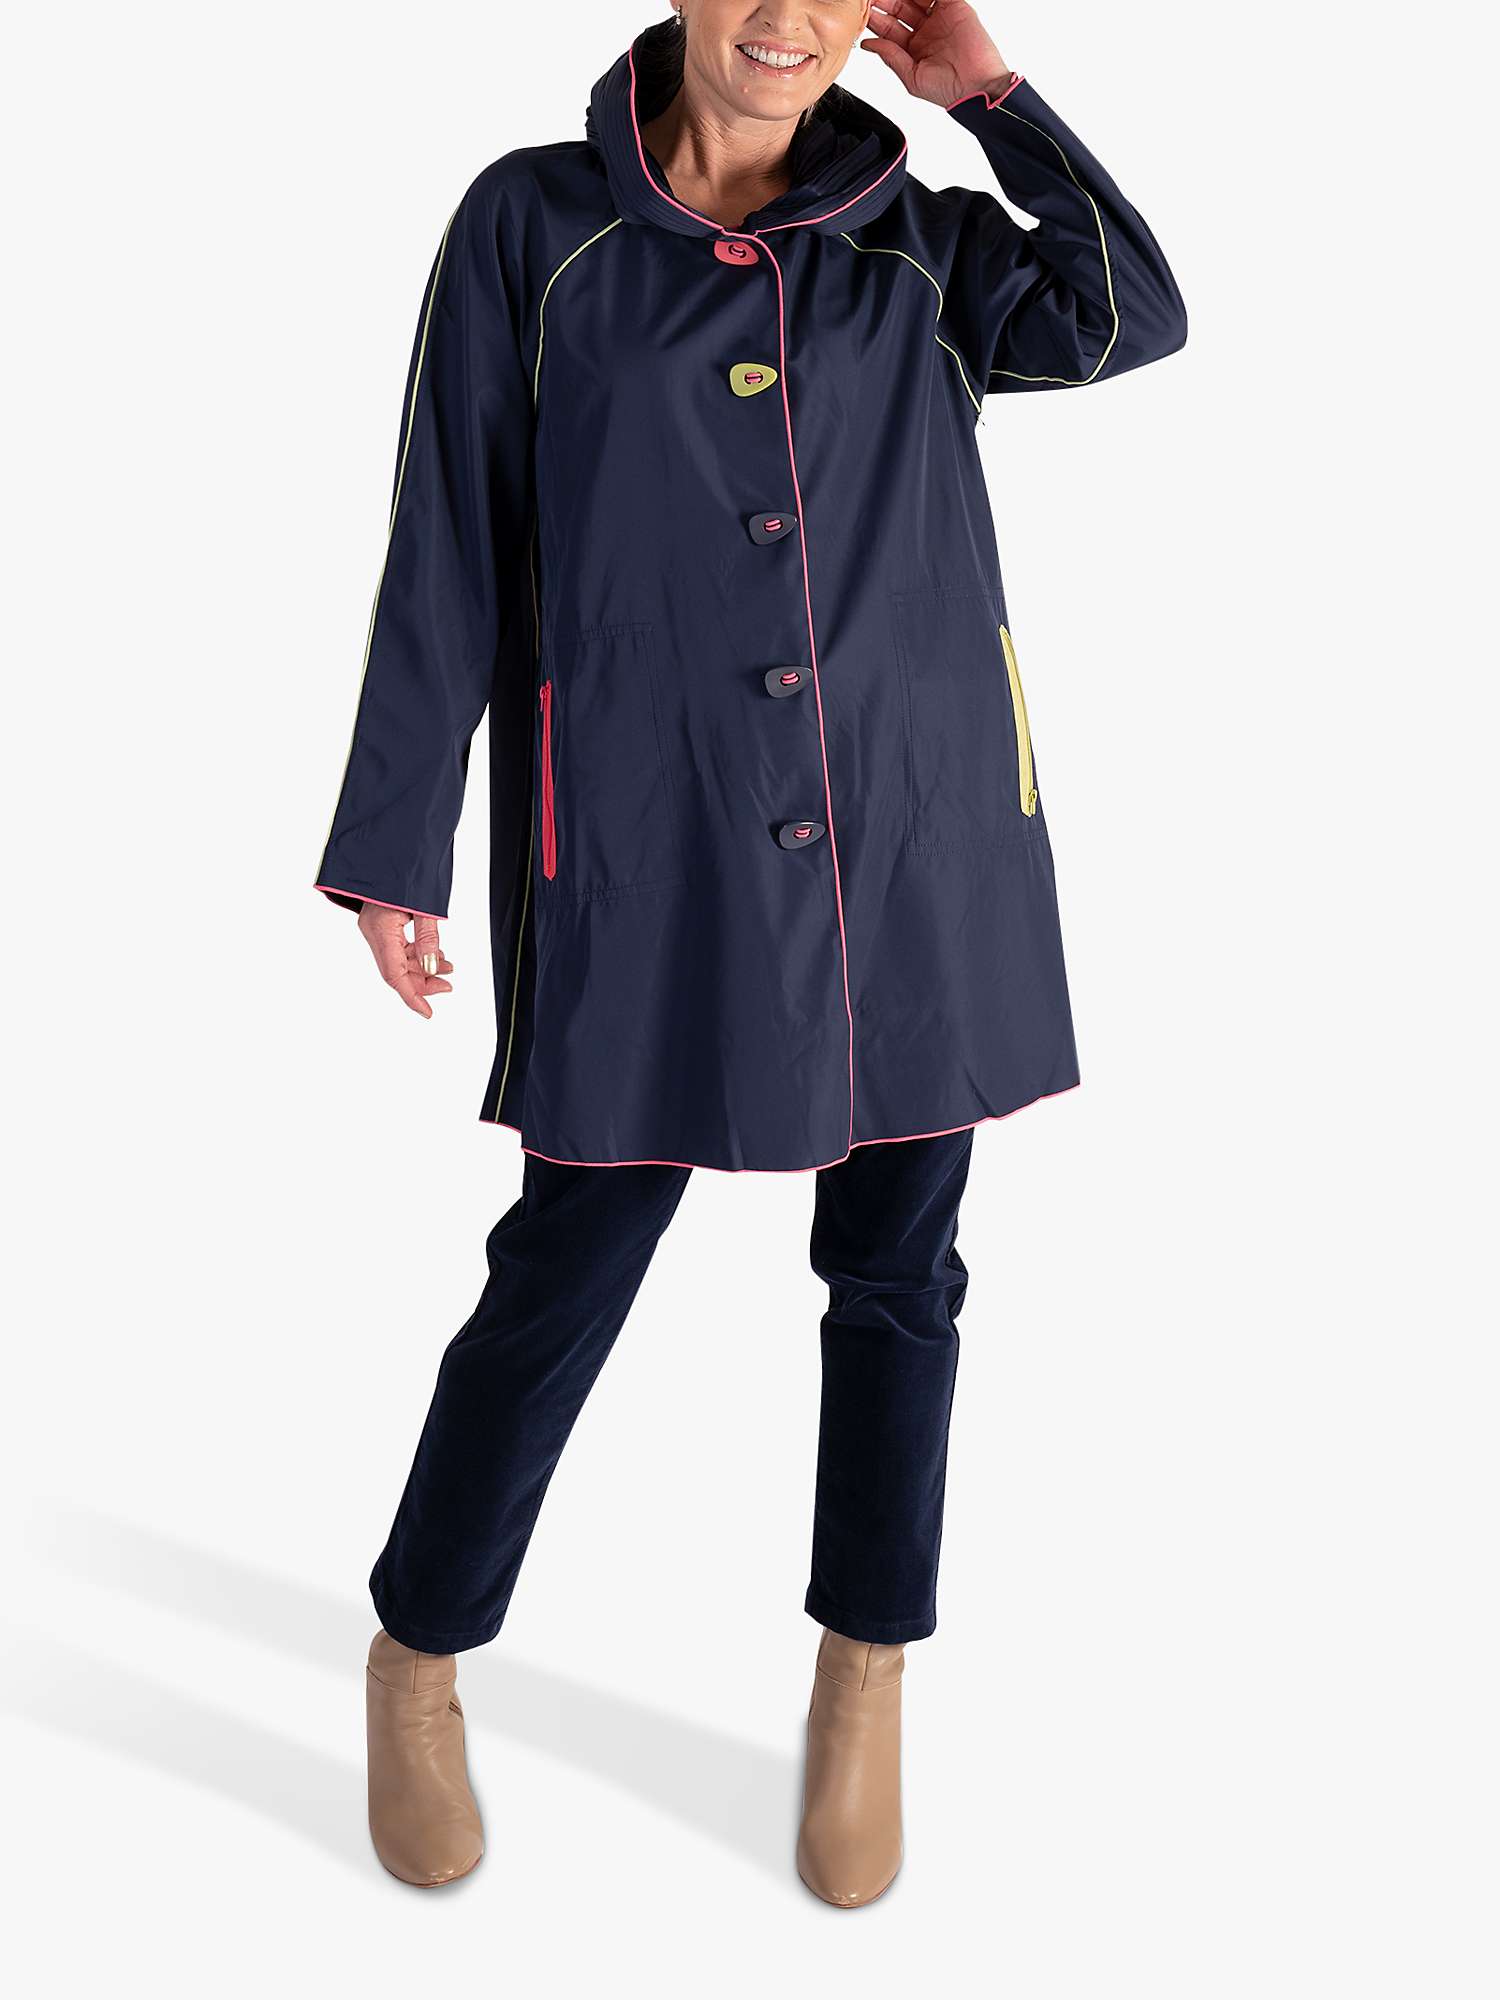 Buy chesca Piped Reversible Raincoat Online at johnlewis.com